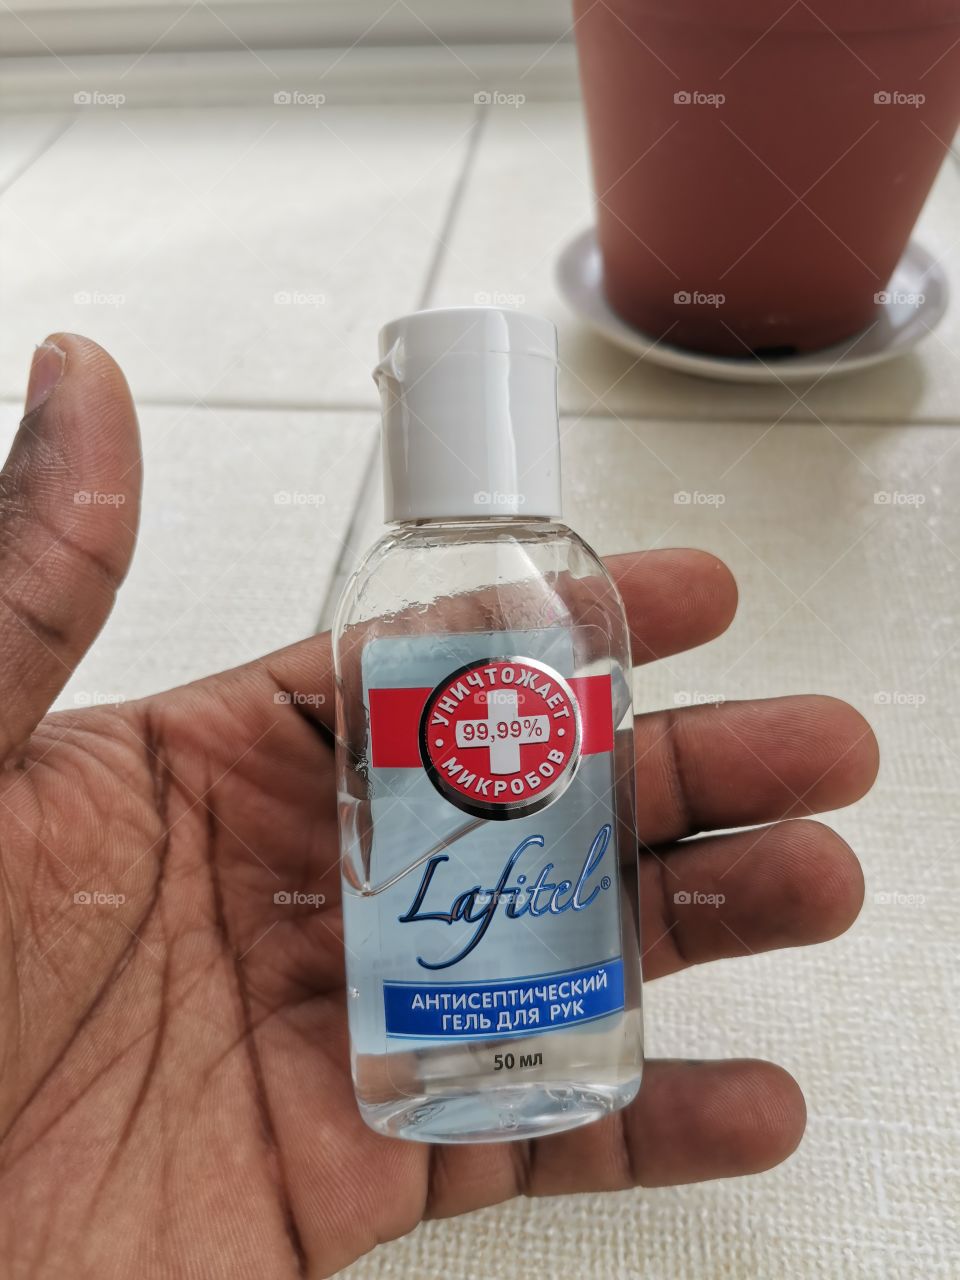 It's no telling that in this period of such a  pandemic that everyone should try to keep themselves as safe as possible... Use a hand sanitizer today! Stay safe out there people may God save us all 🙏